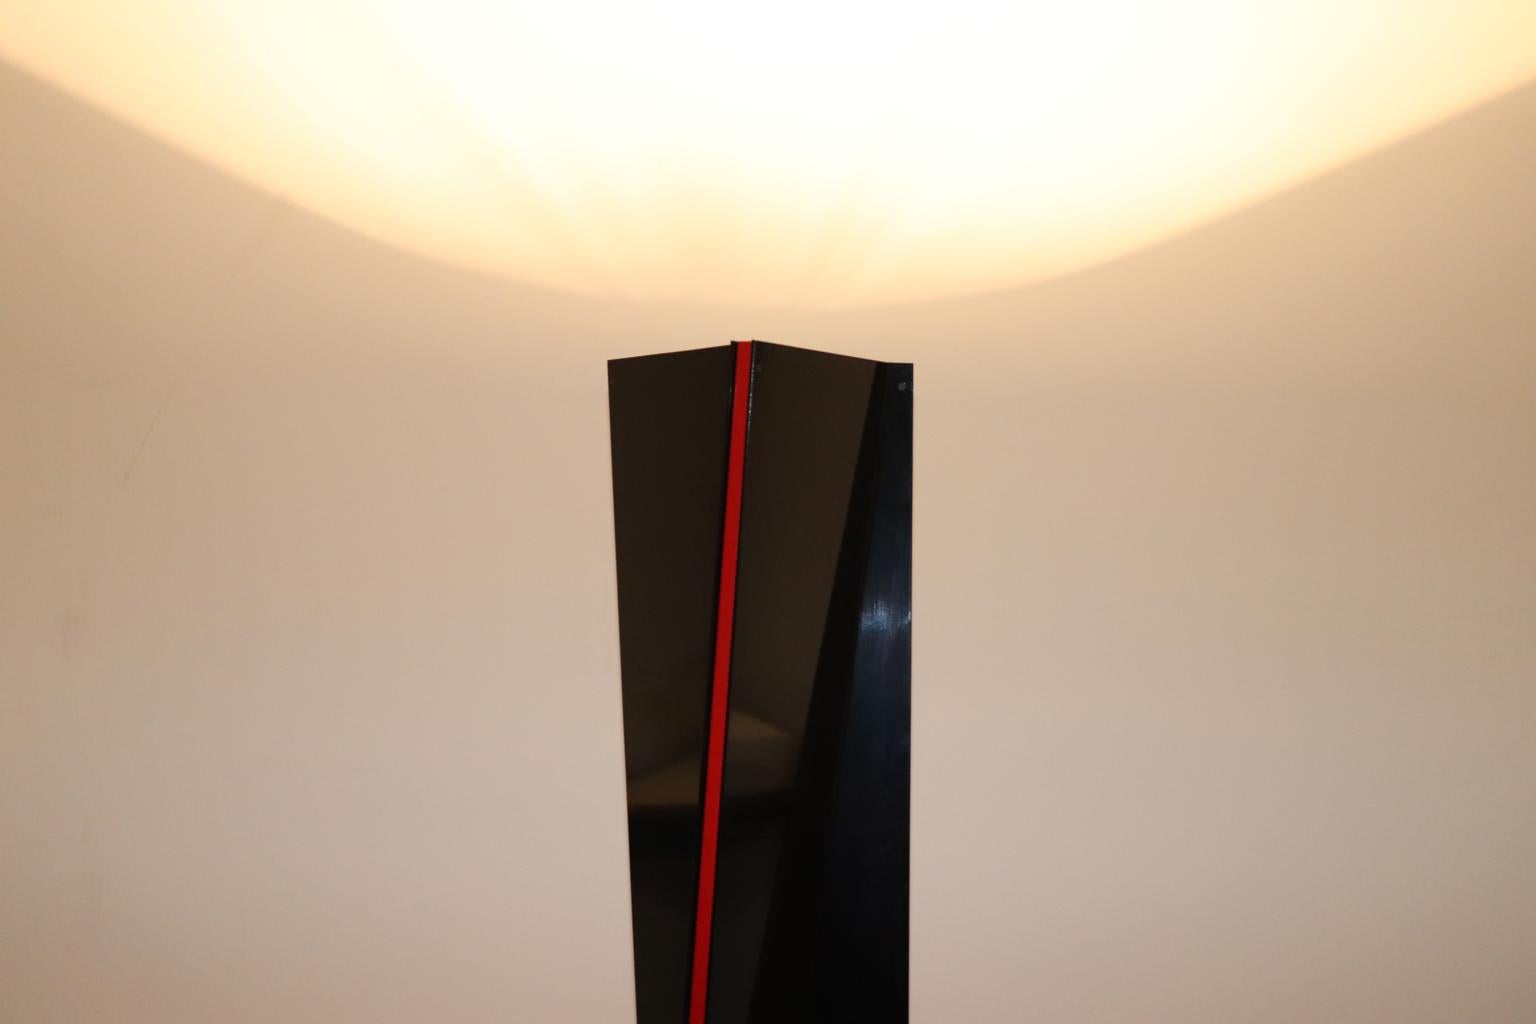 Mauro Marzollo Sculptured Floor Lamp Black with Red Stripes Details In Good Condition For Sale In Saddle Brook , NJ